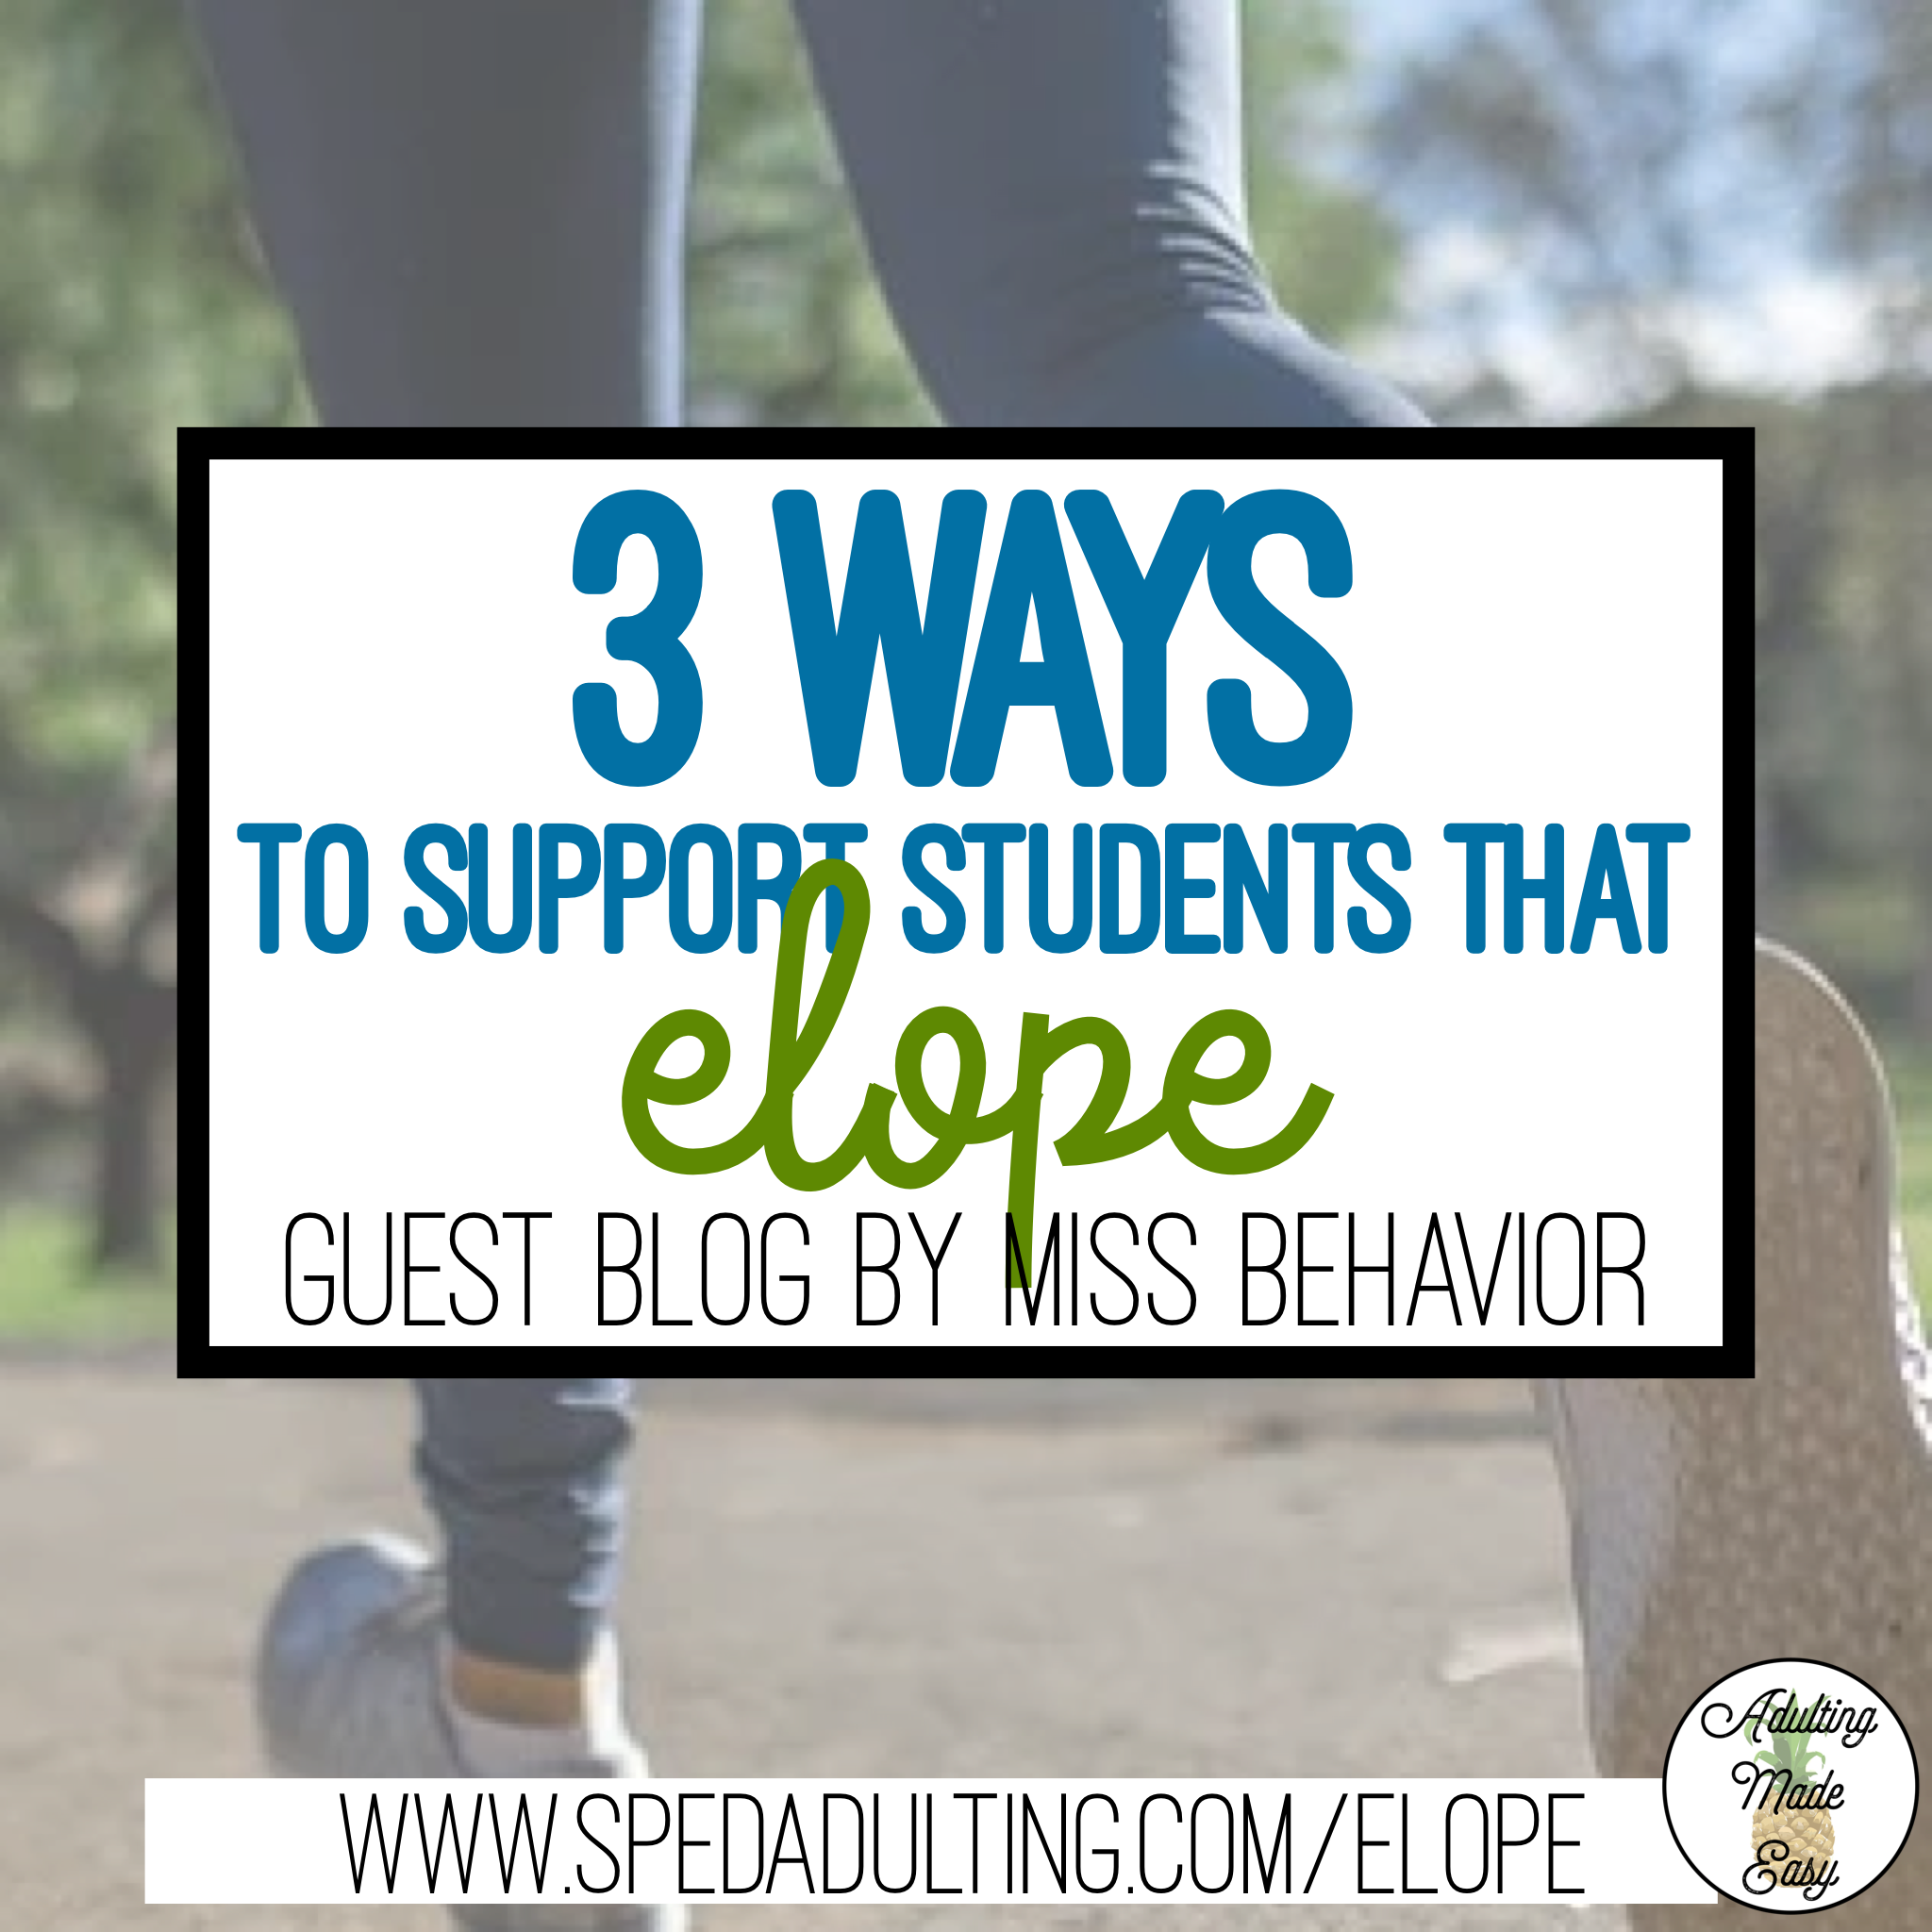 BLOG: 3 Ways to Support Students That Elope